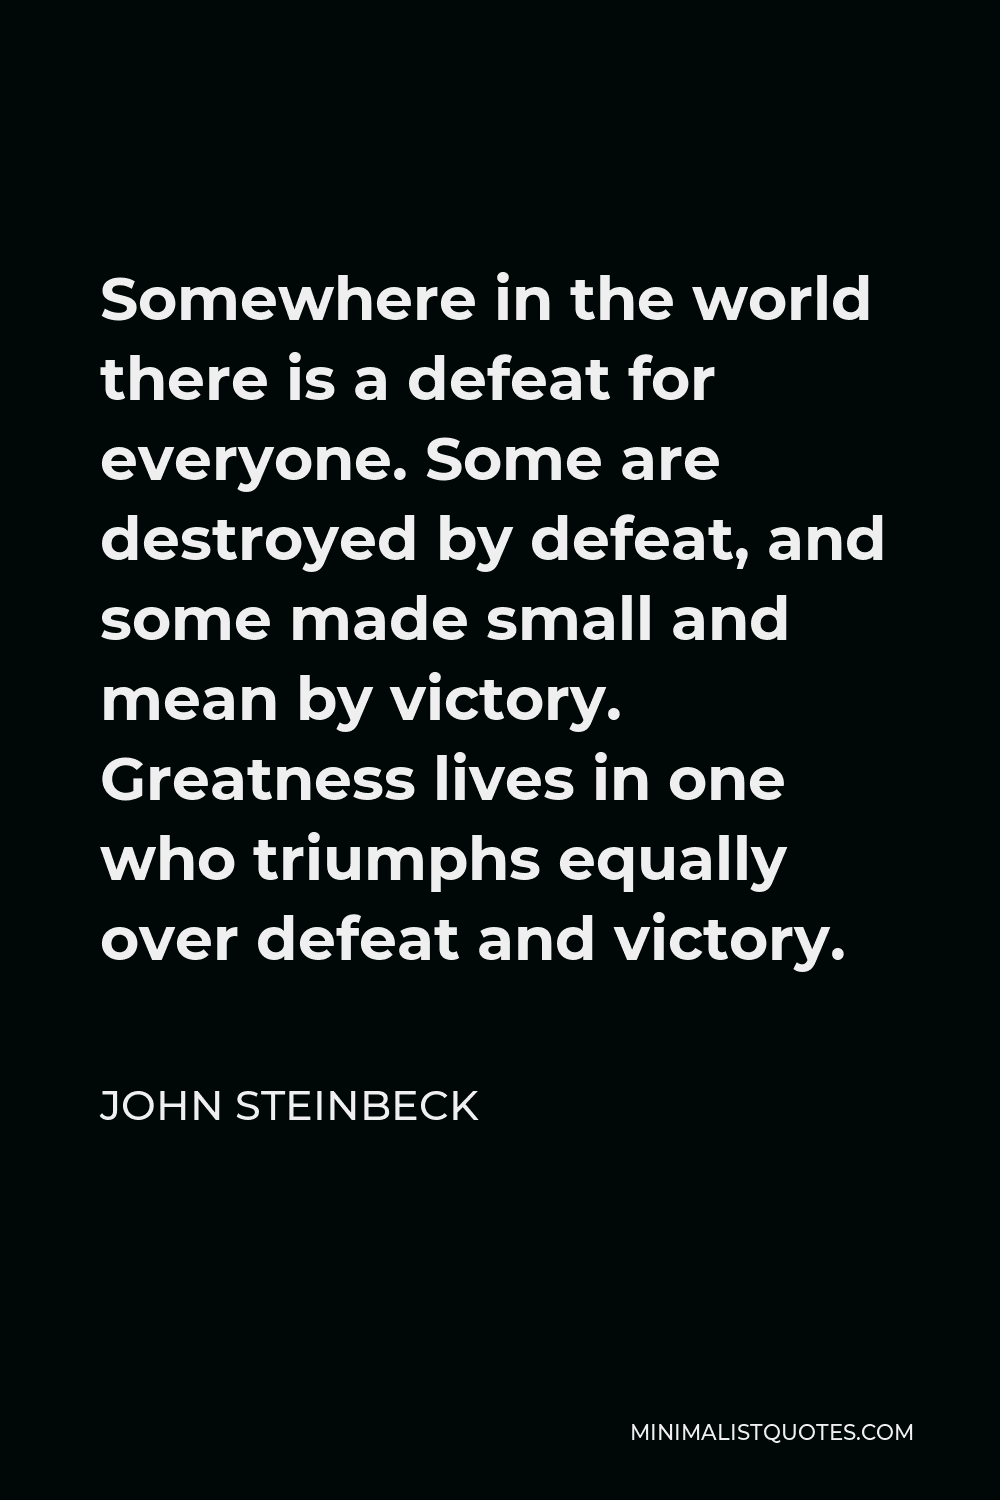 John Steinbeck Quote - Somewhere in the world there is a defeat for everyone. Some are destroyed by defeat, and some made small and mean by victory. Greatness lives in one who triumphs equally over defeat and victory.